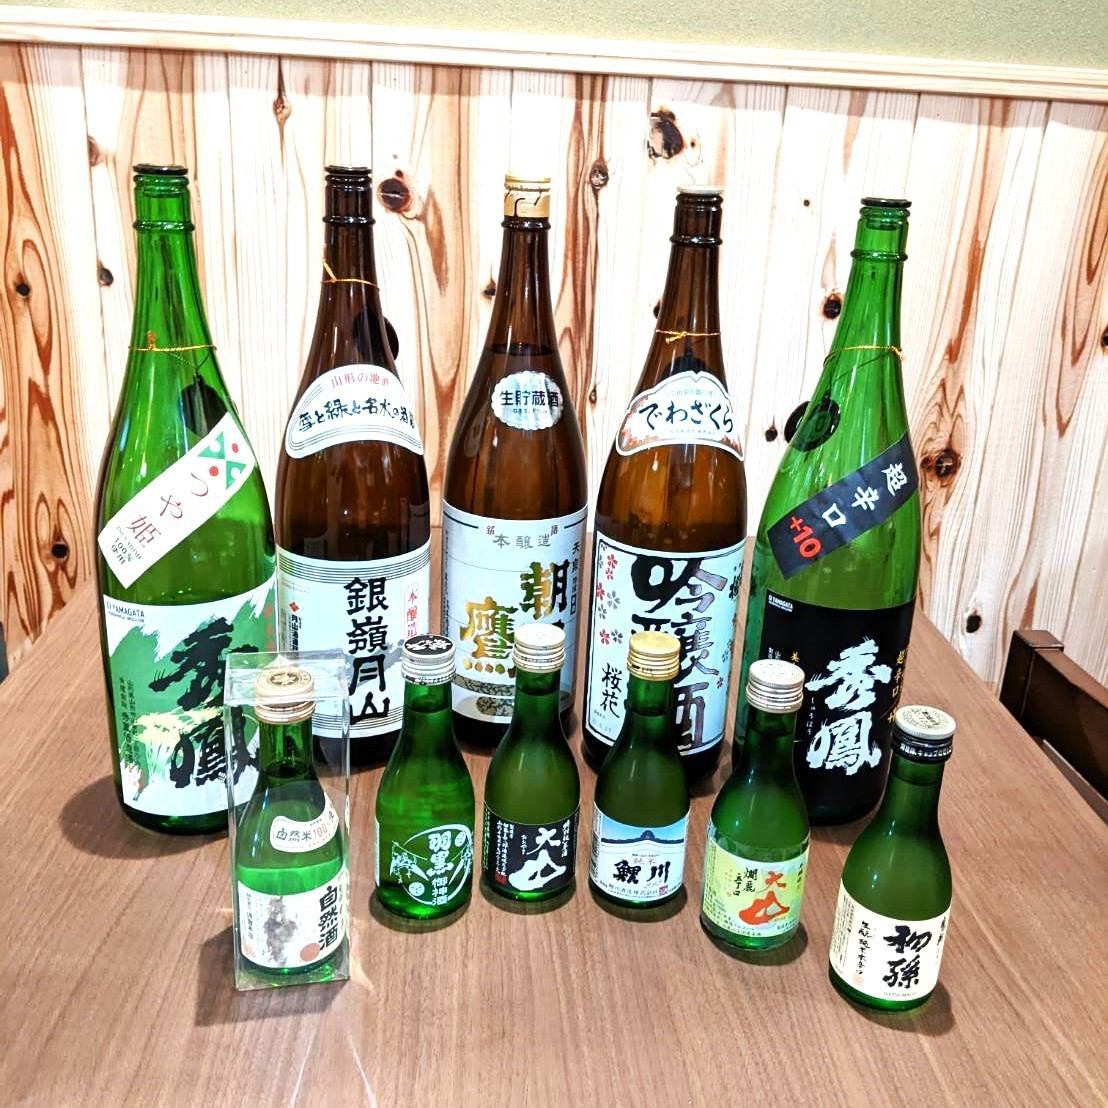 We have a variety of local sake from all over Japan! If you are interested, please contact the store manager.